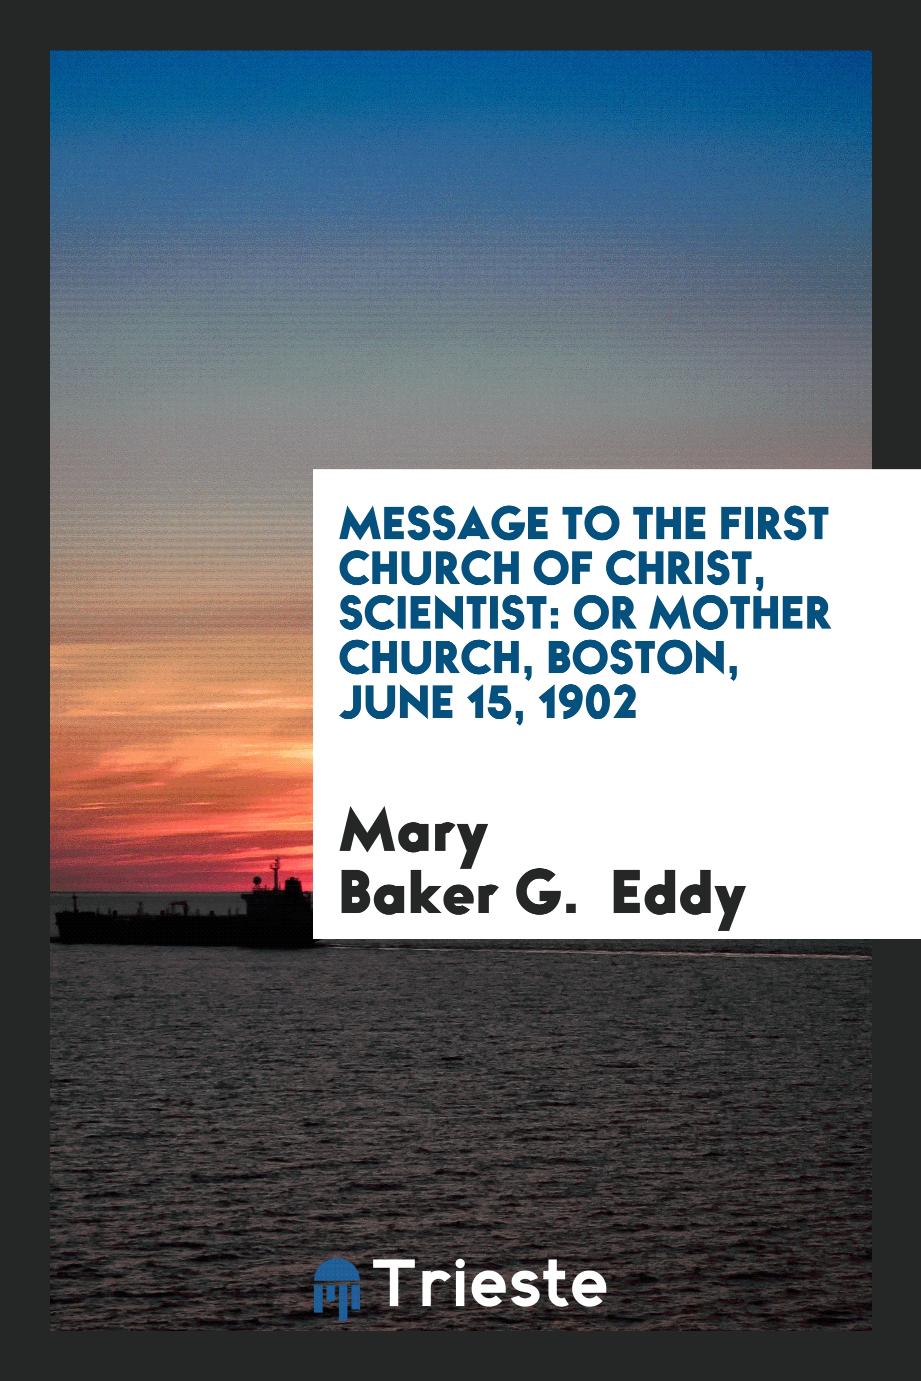 Message to the First Church of Christ, Scientist: Or Mother Church, Boston, June 15, 1902